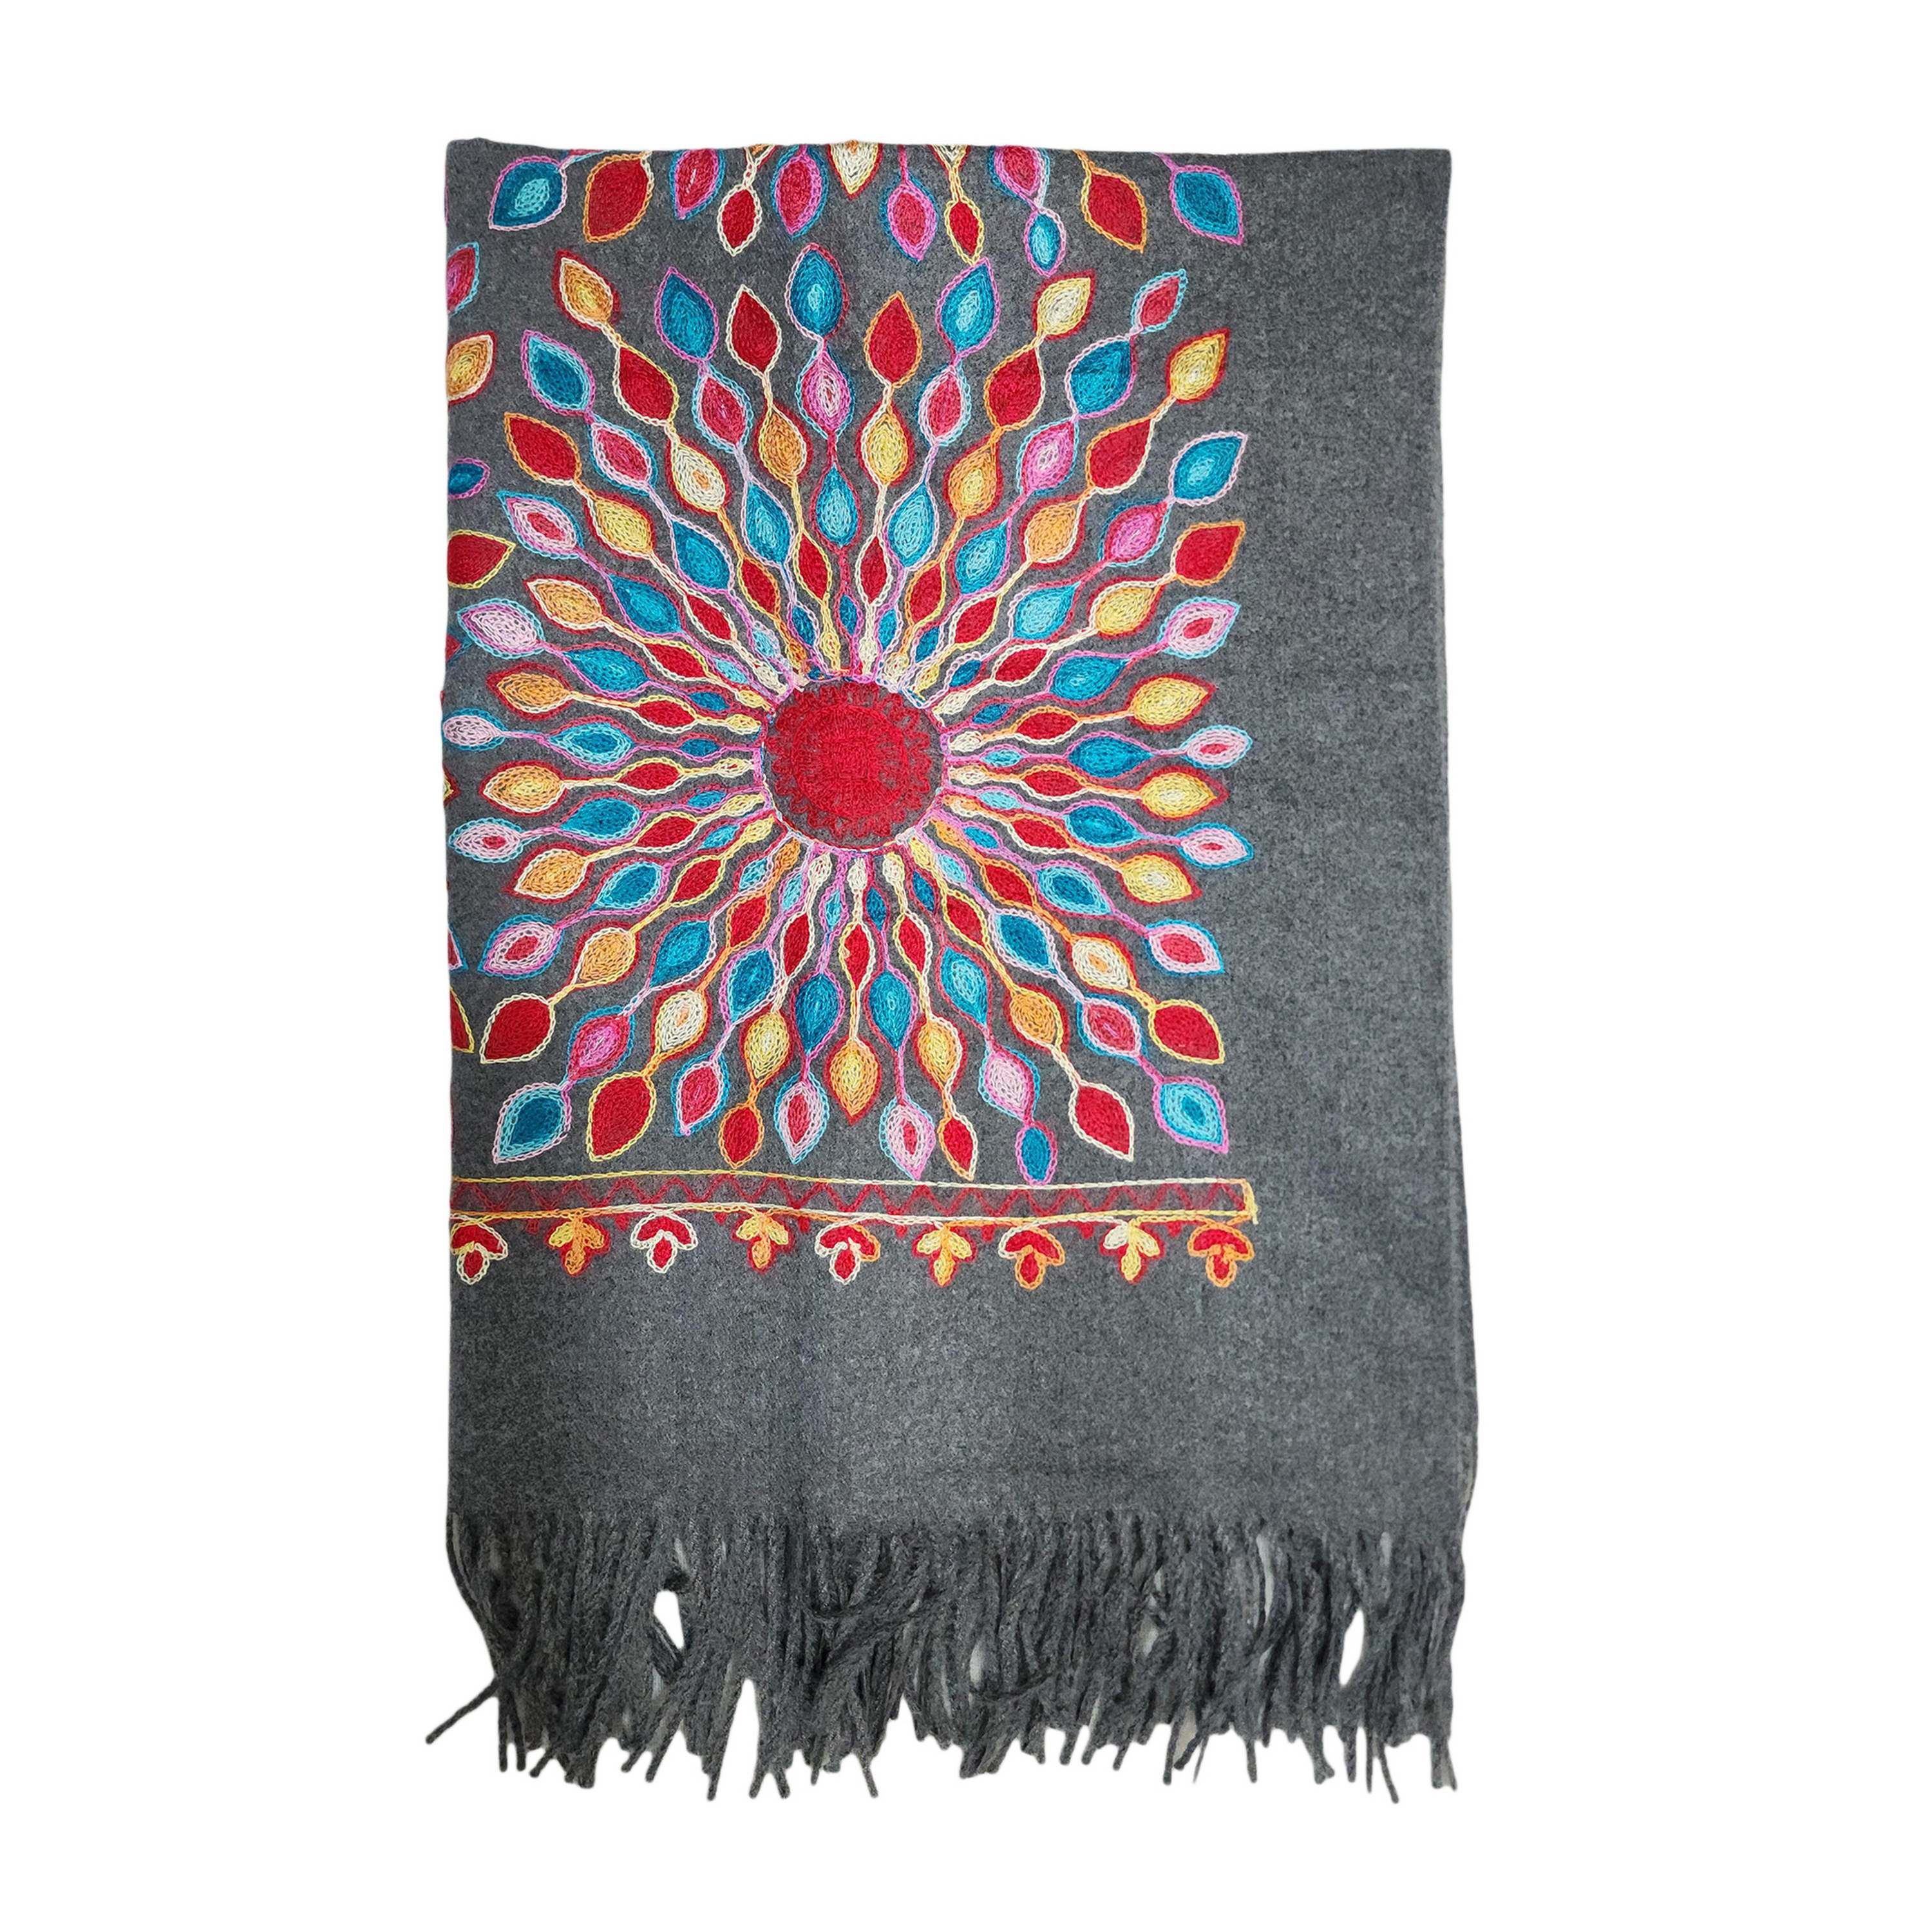 Desigener Shawl, Thick Nepali Shawl, With Heavy Embroidery, Color charcoal Gray